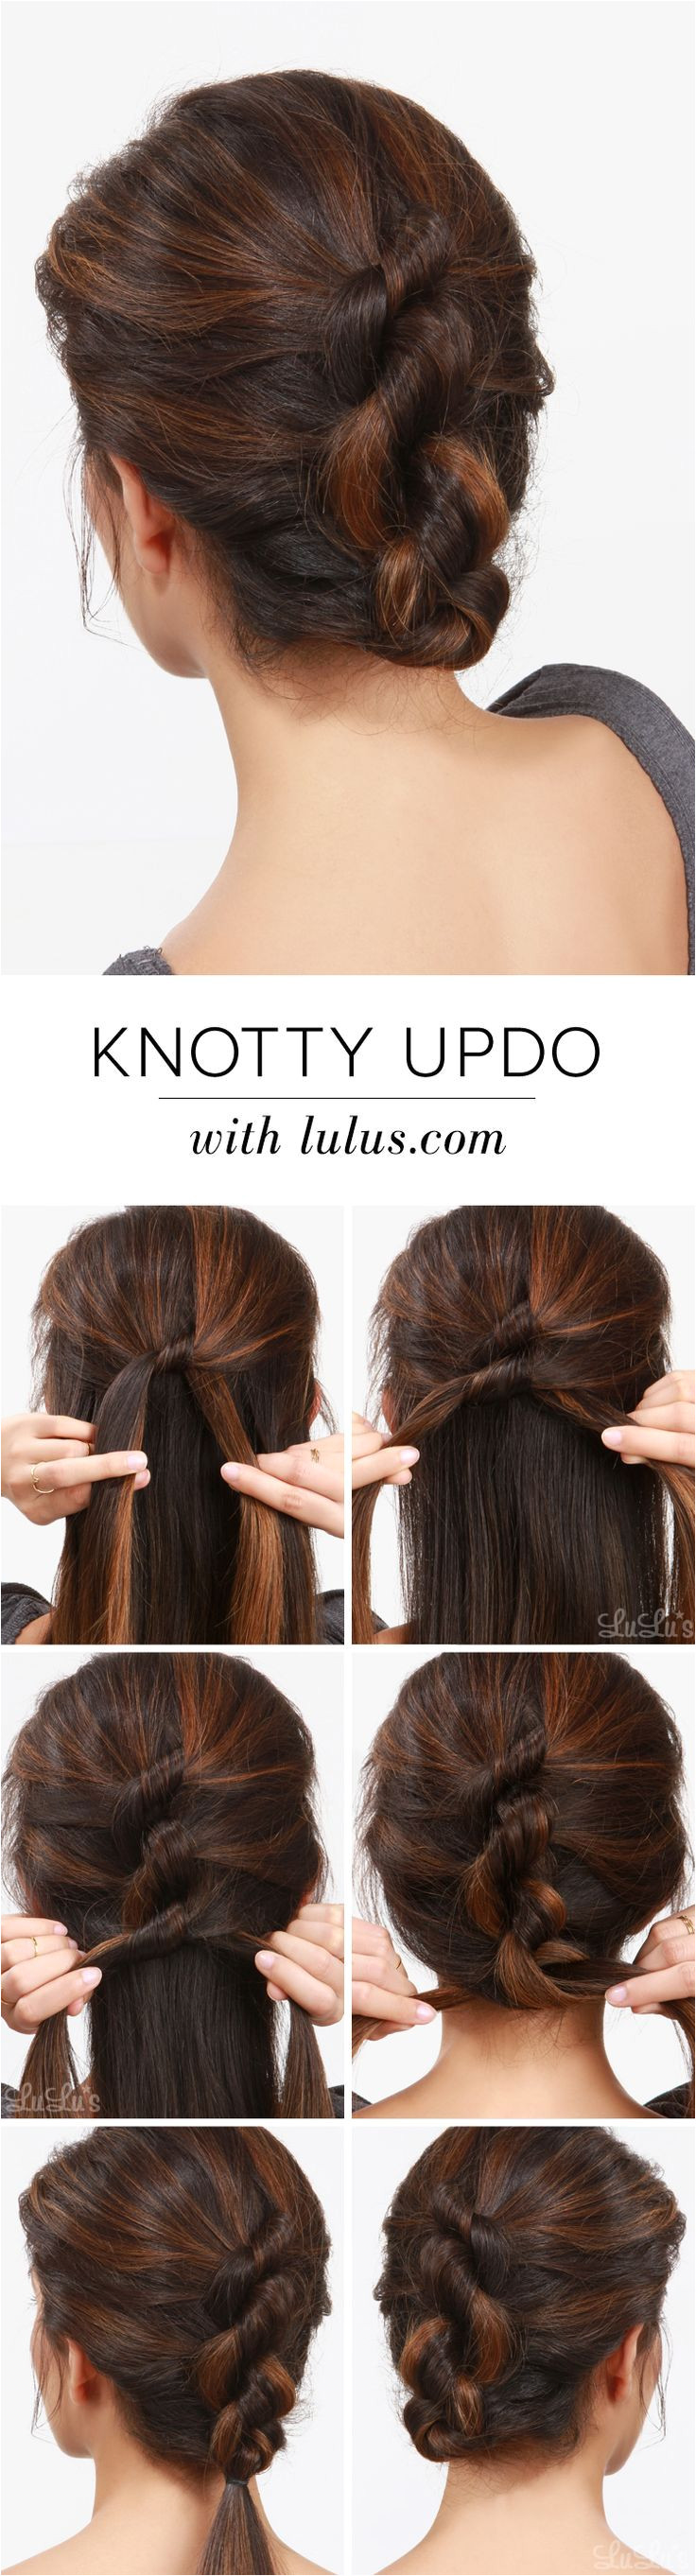 This week s adorable Knotty Updo Hair Tutorial is so simple to execute and perfect for day or night Find the tutorial on the LuLu s blog